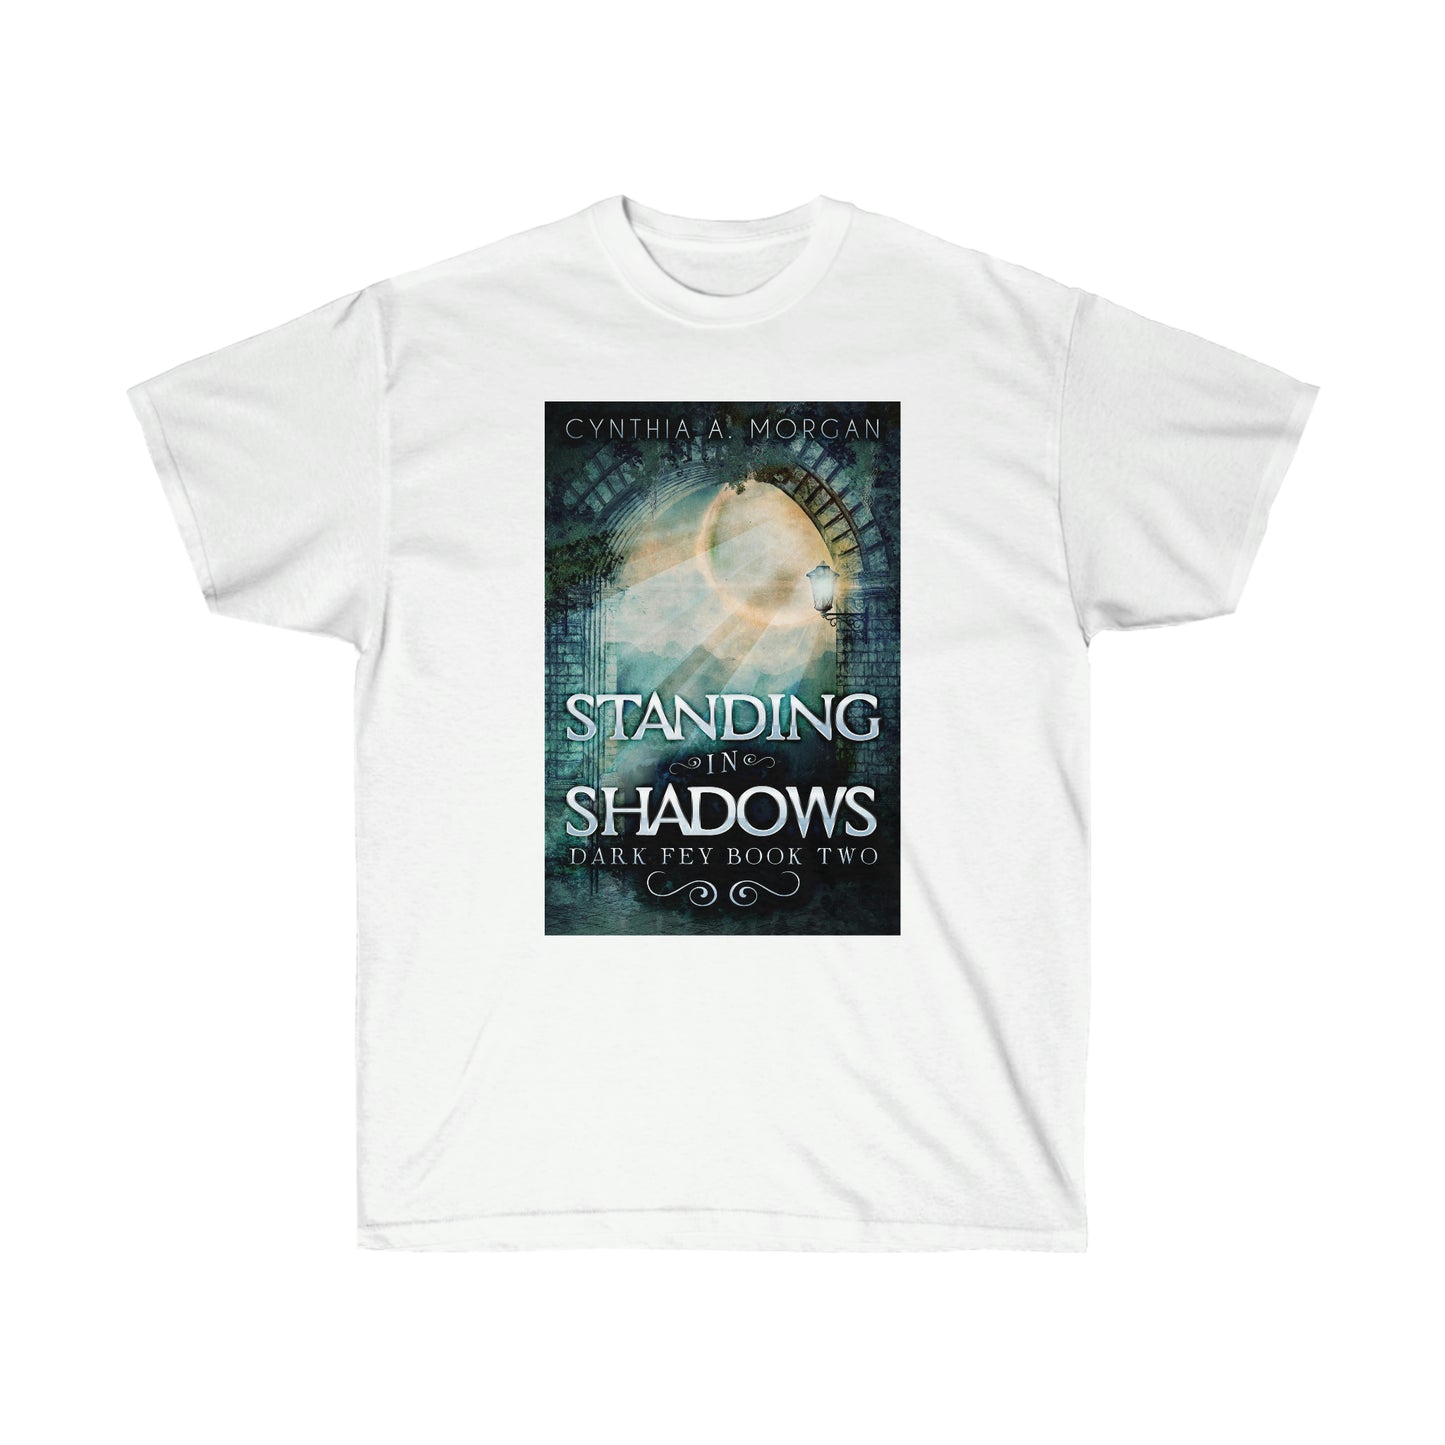 Standing in Shadows - Unisex T-Shirt